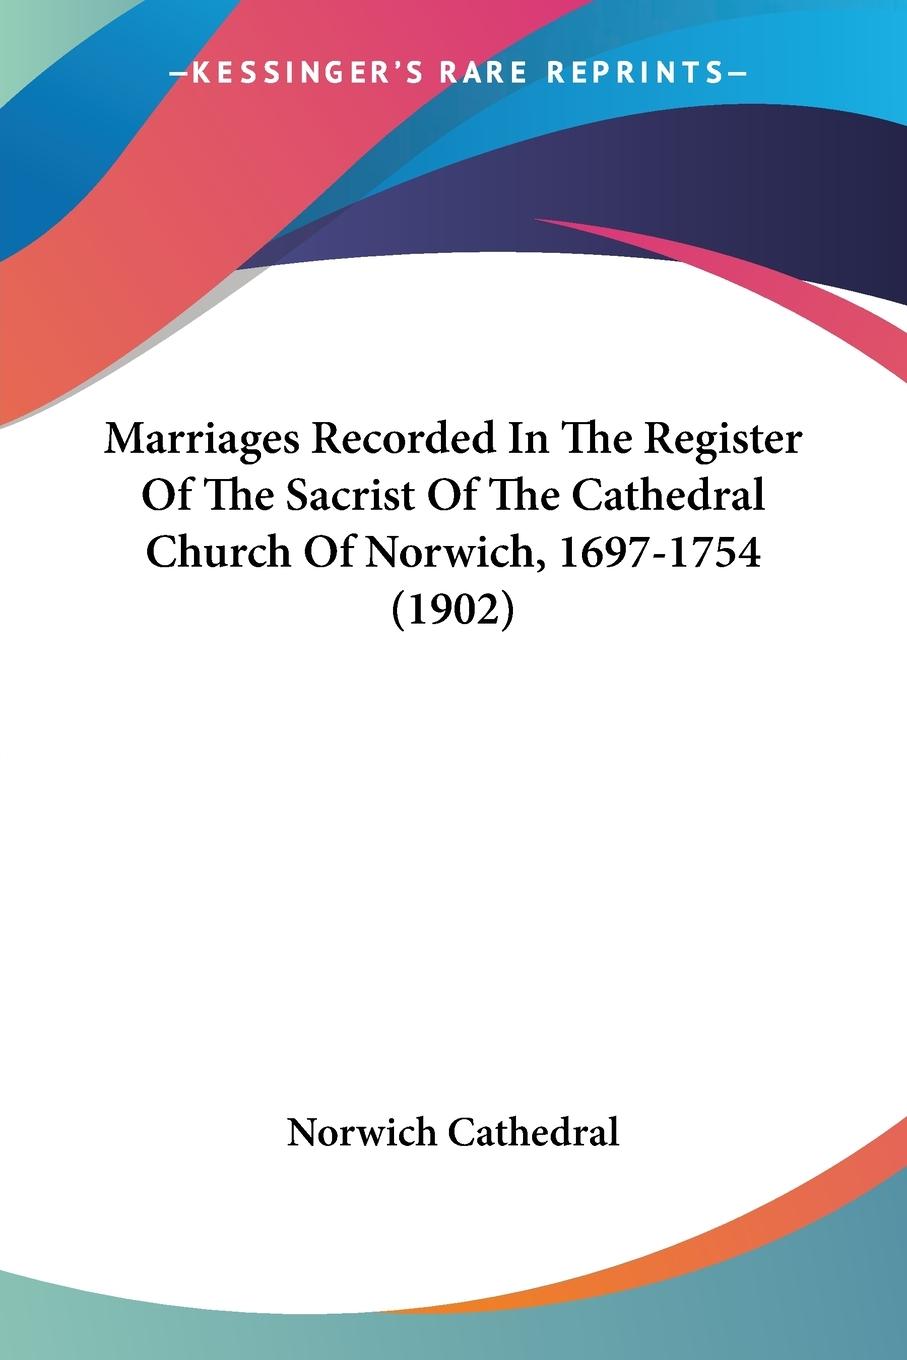 Marriages Recorded In The Register Of The Sacrist Of The Cathedral Church Of Norwich, 1697-1754 (1902) - Norwich Cathedral